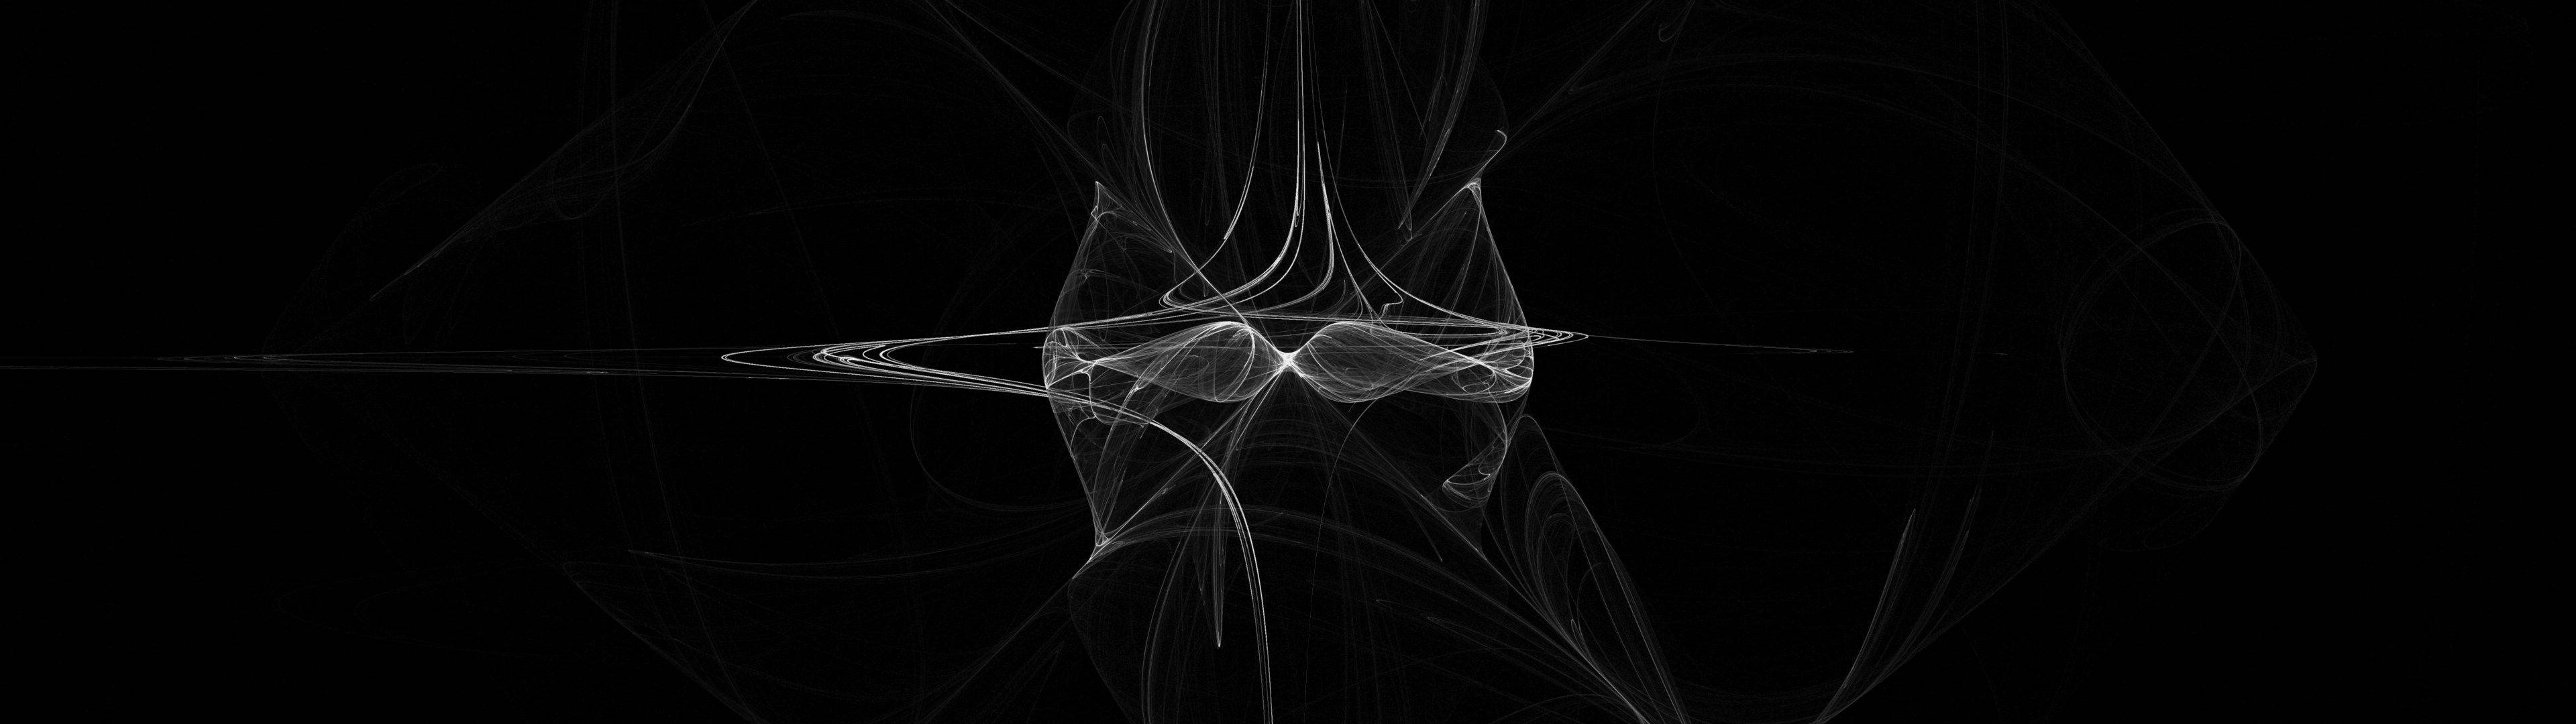 Abstract Mist Lines Dual Monitor Wallpaper